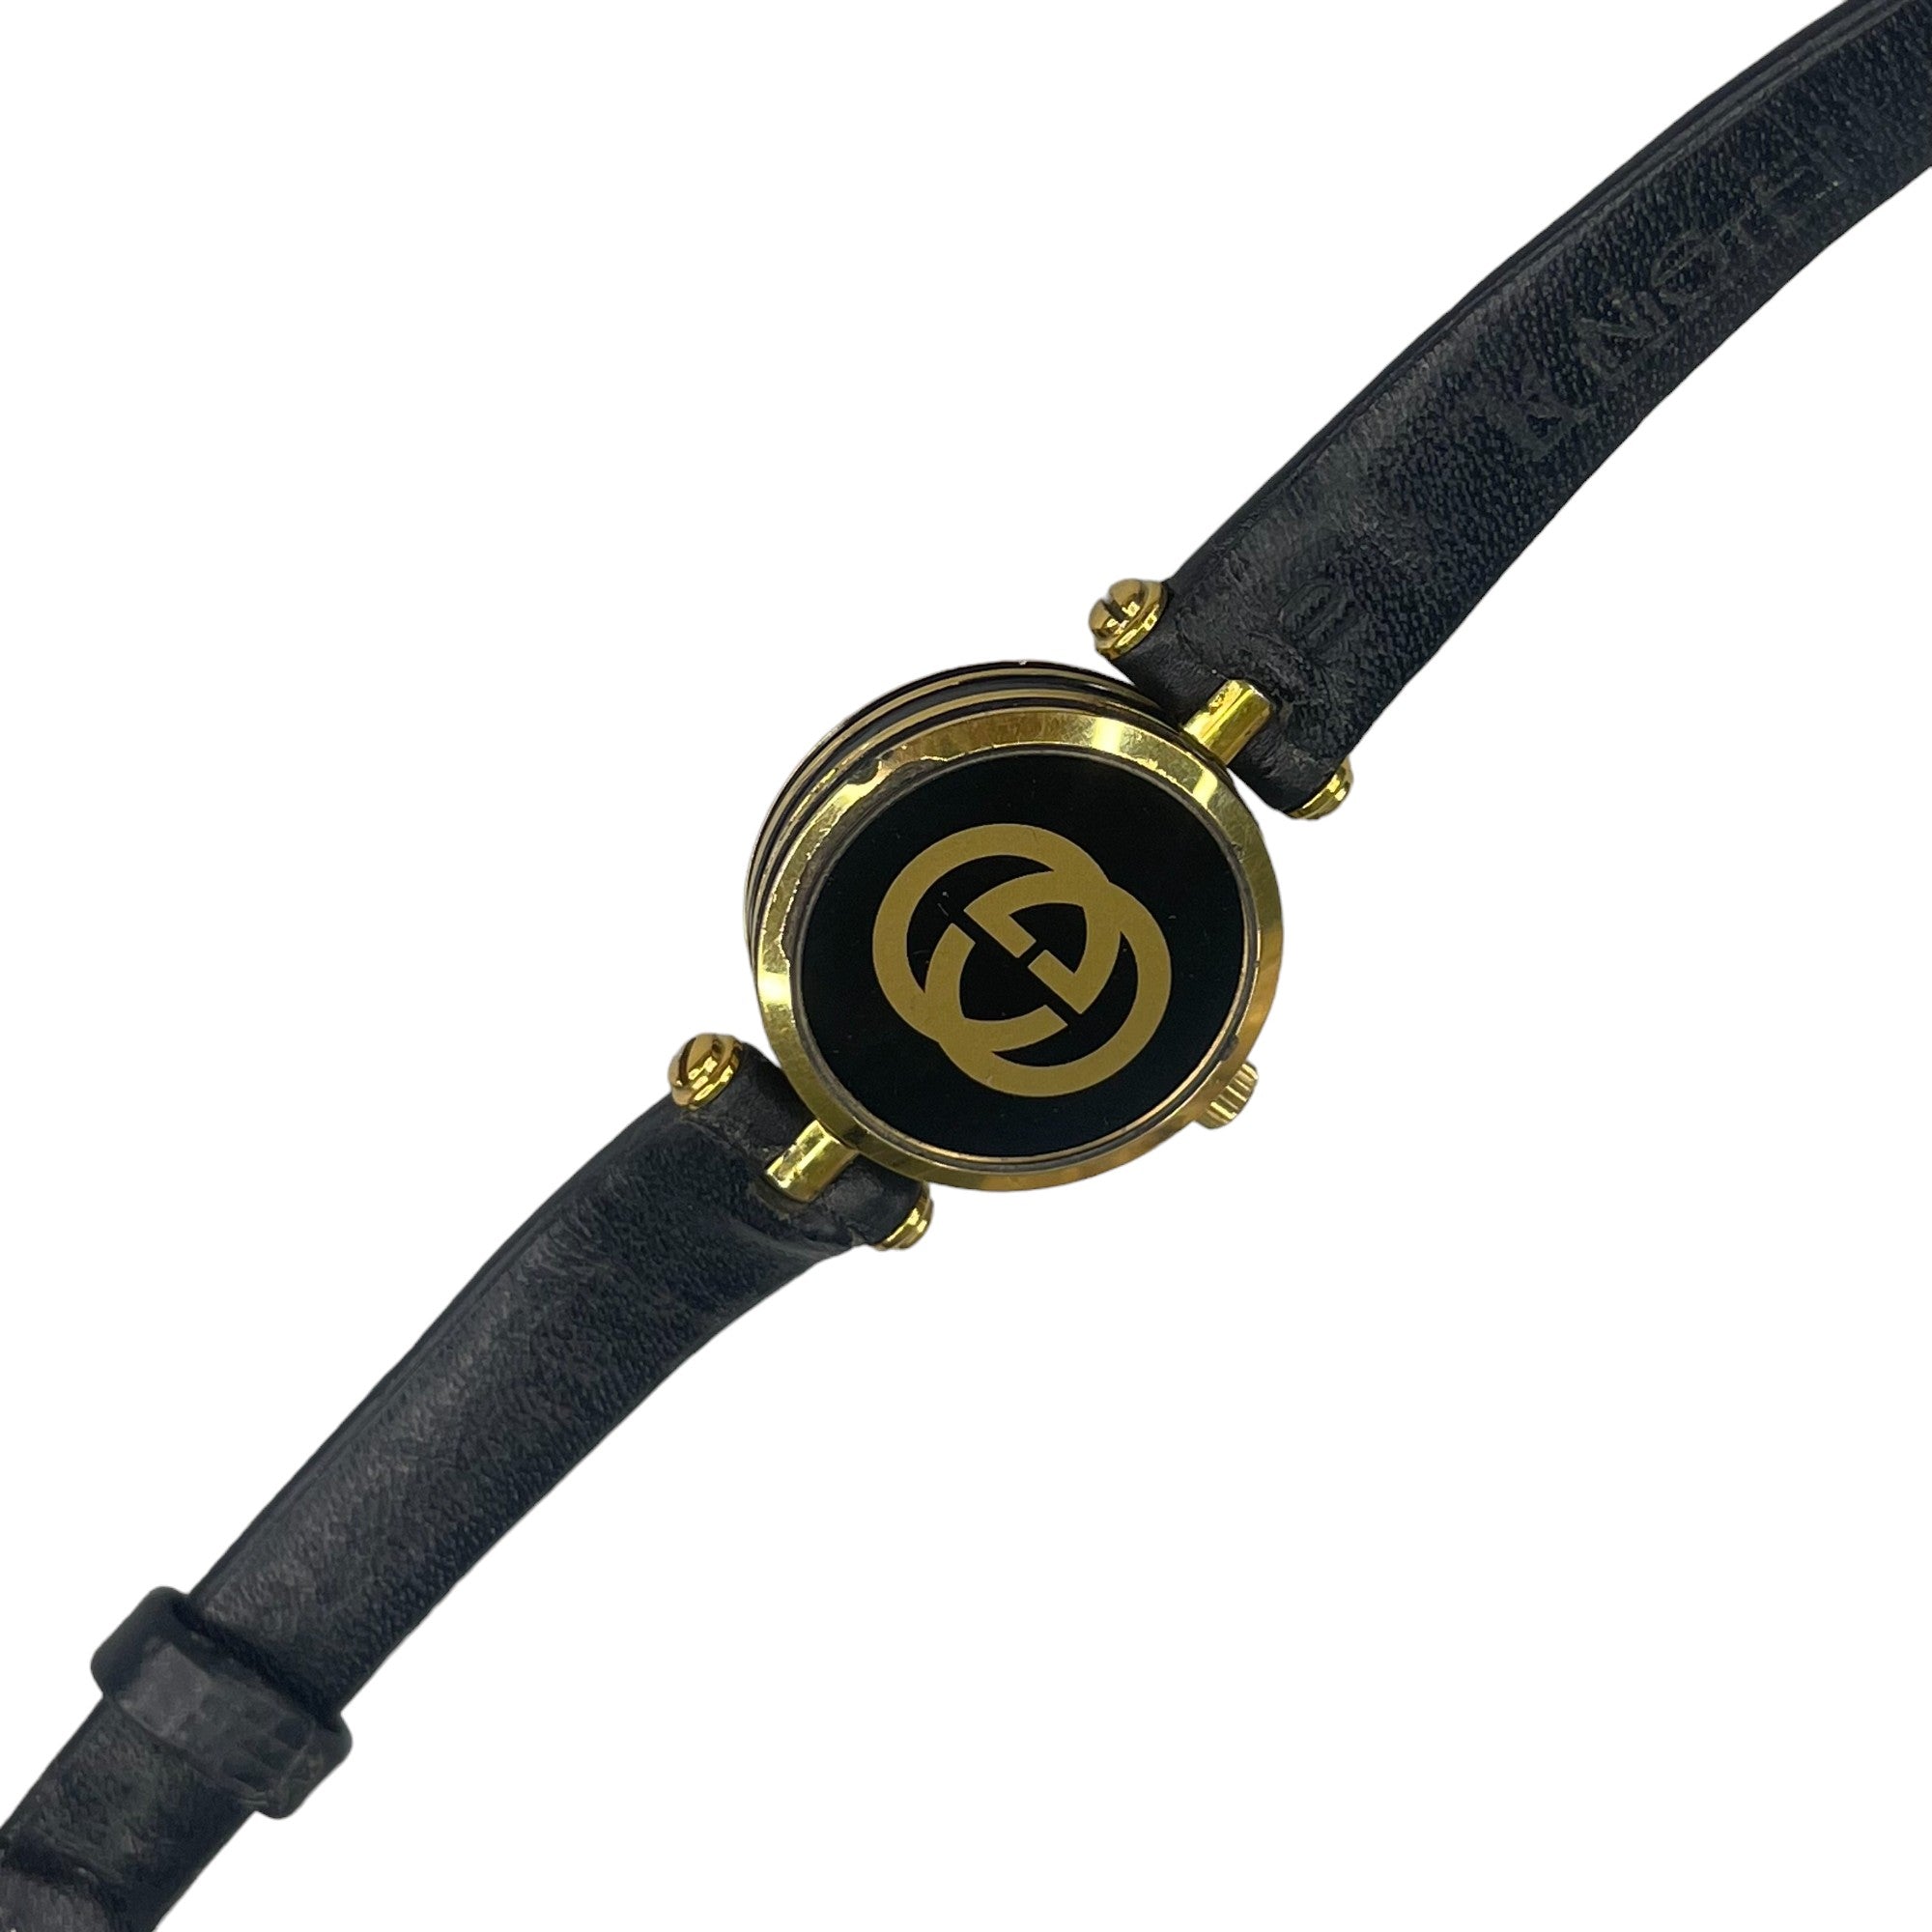 GUCCI 2000M CLASSIC BLACK/GOLD LEATHER WATCH